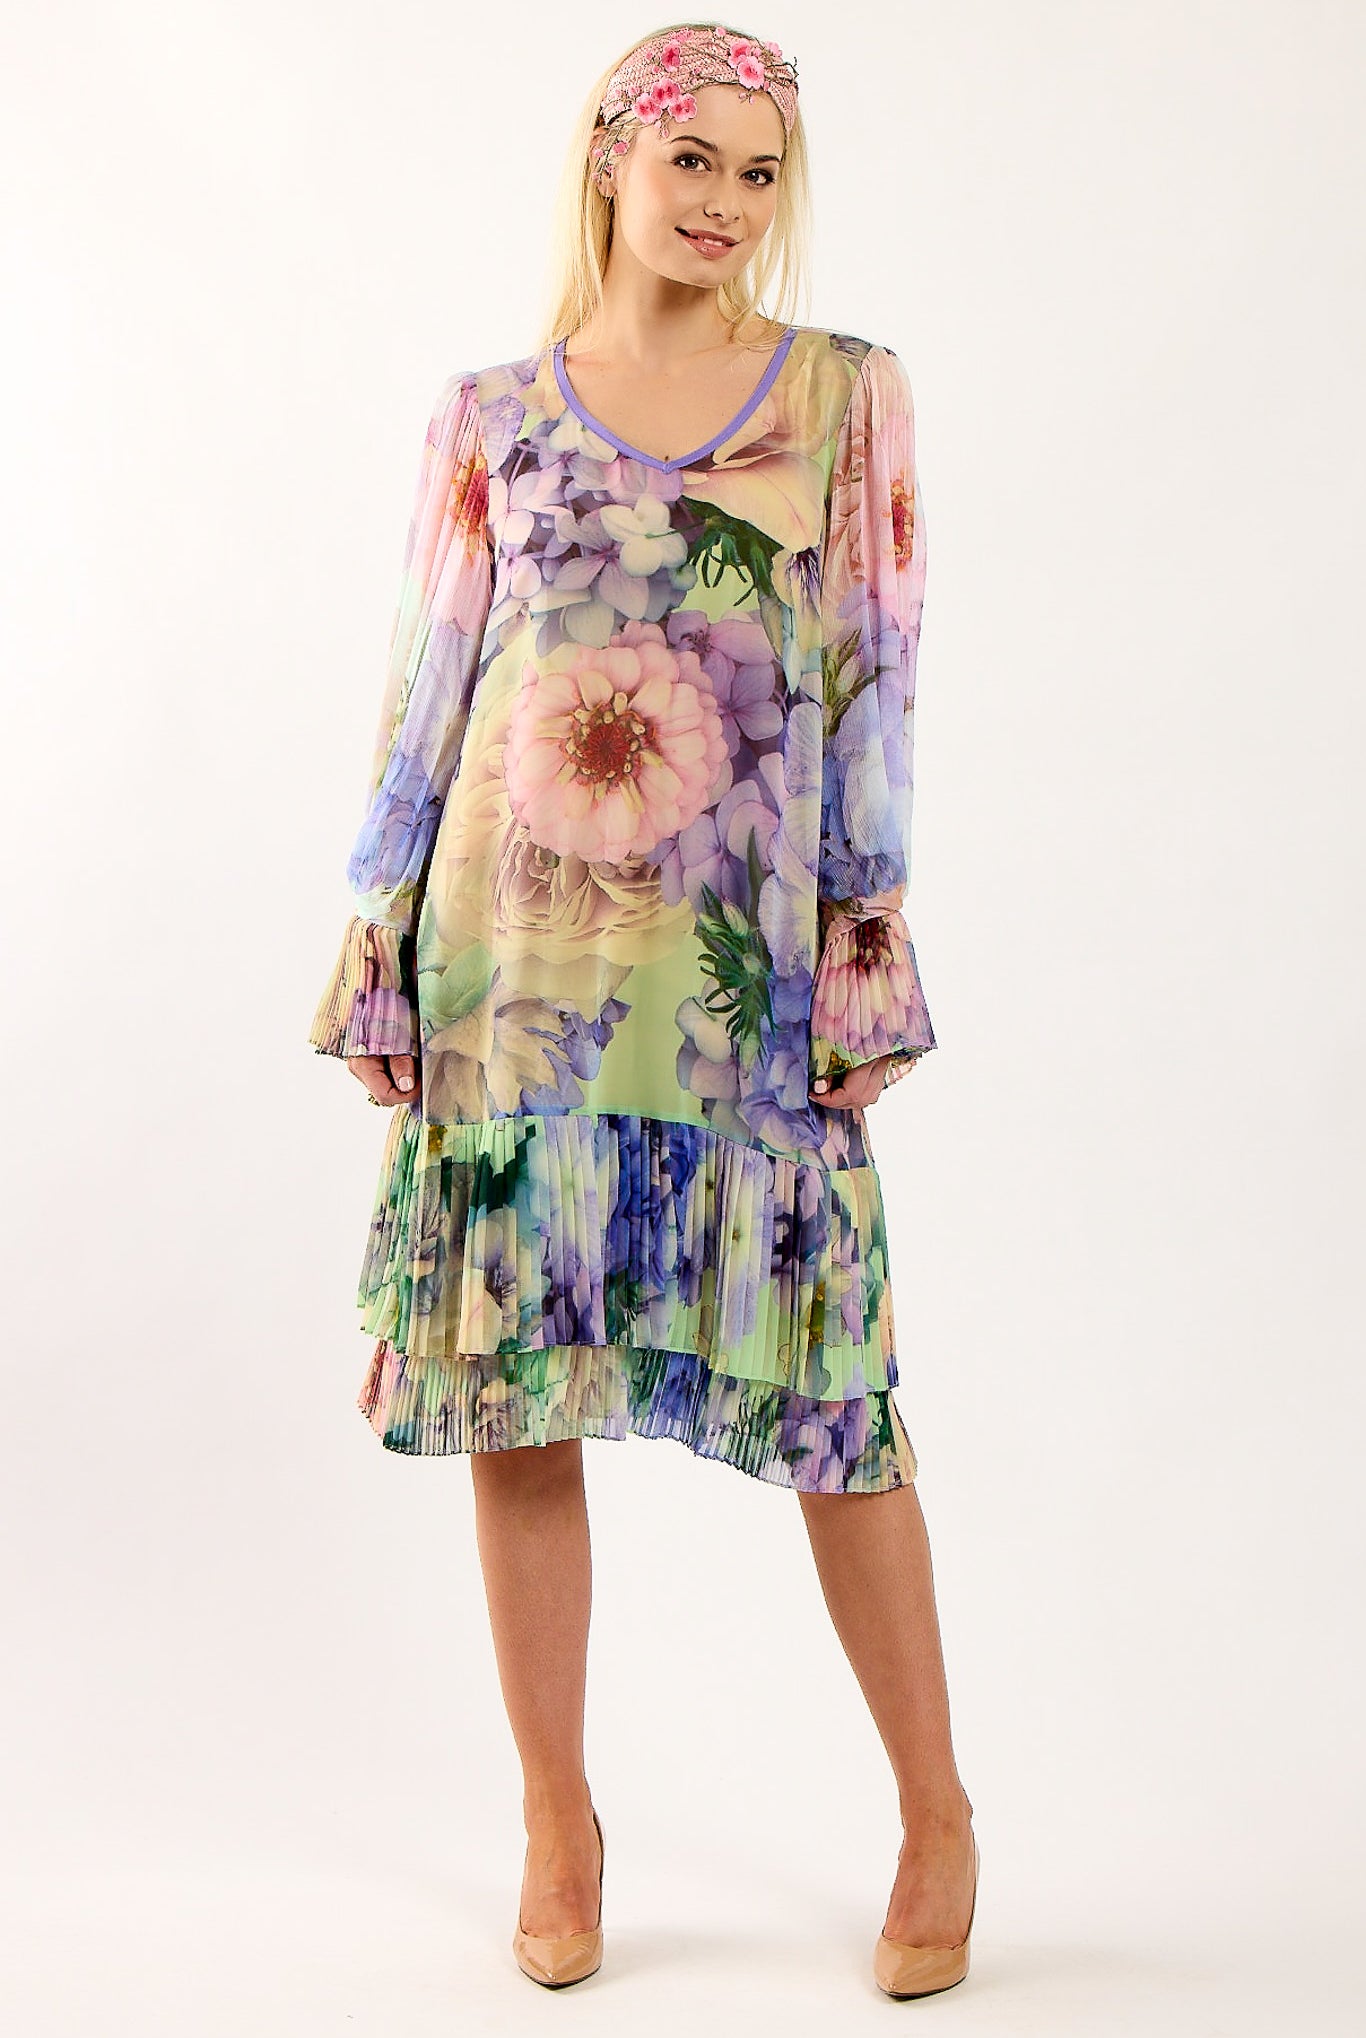 TRELISE COOPER Pleat Me Later Tunic - Pastel Floral - Magpie Style